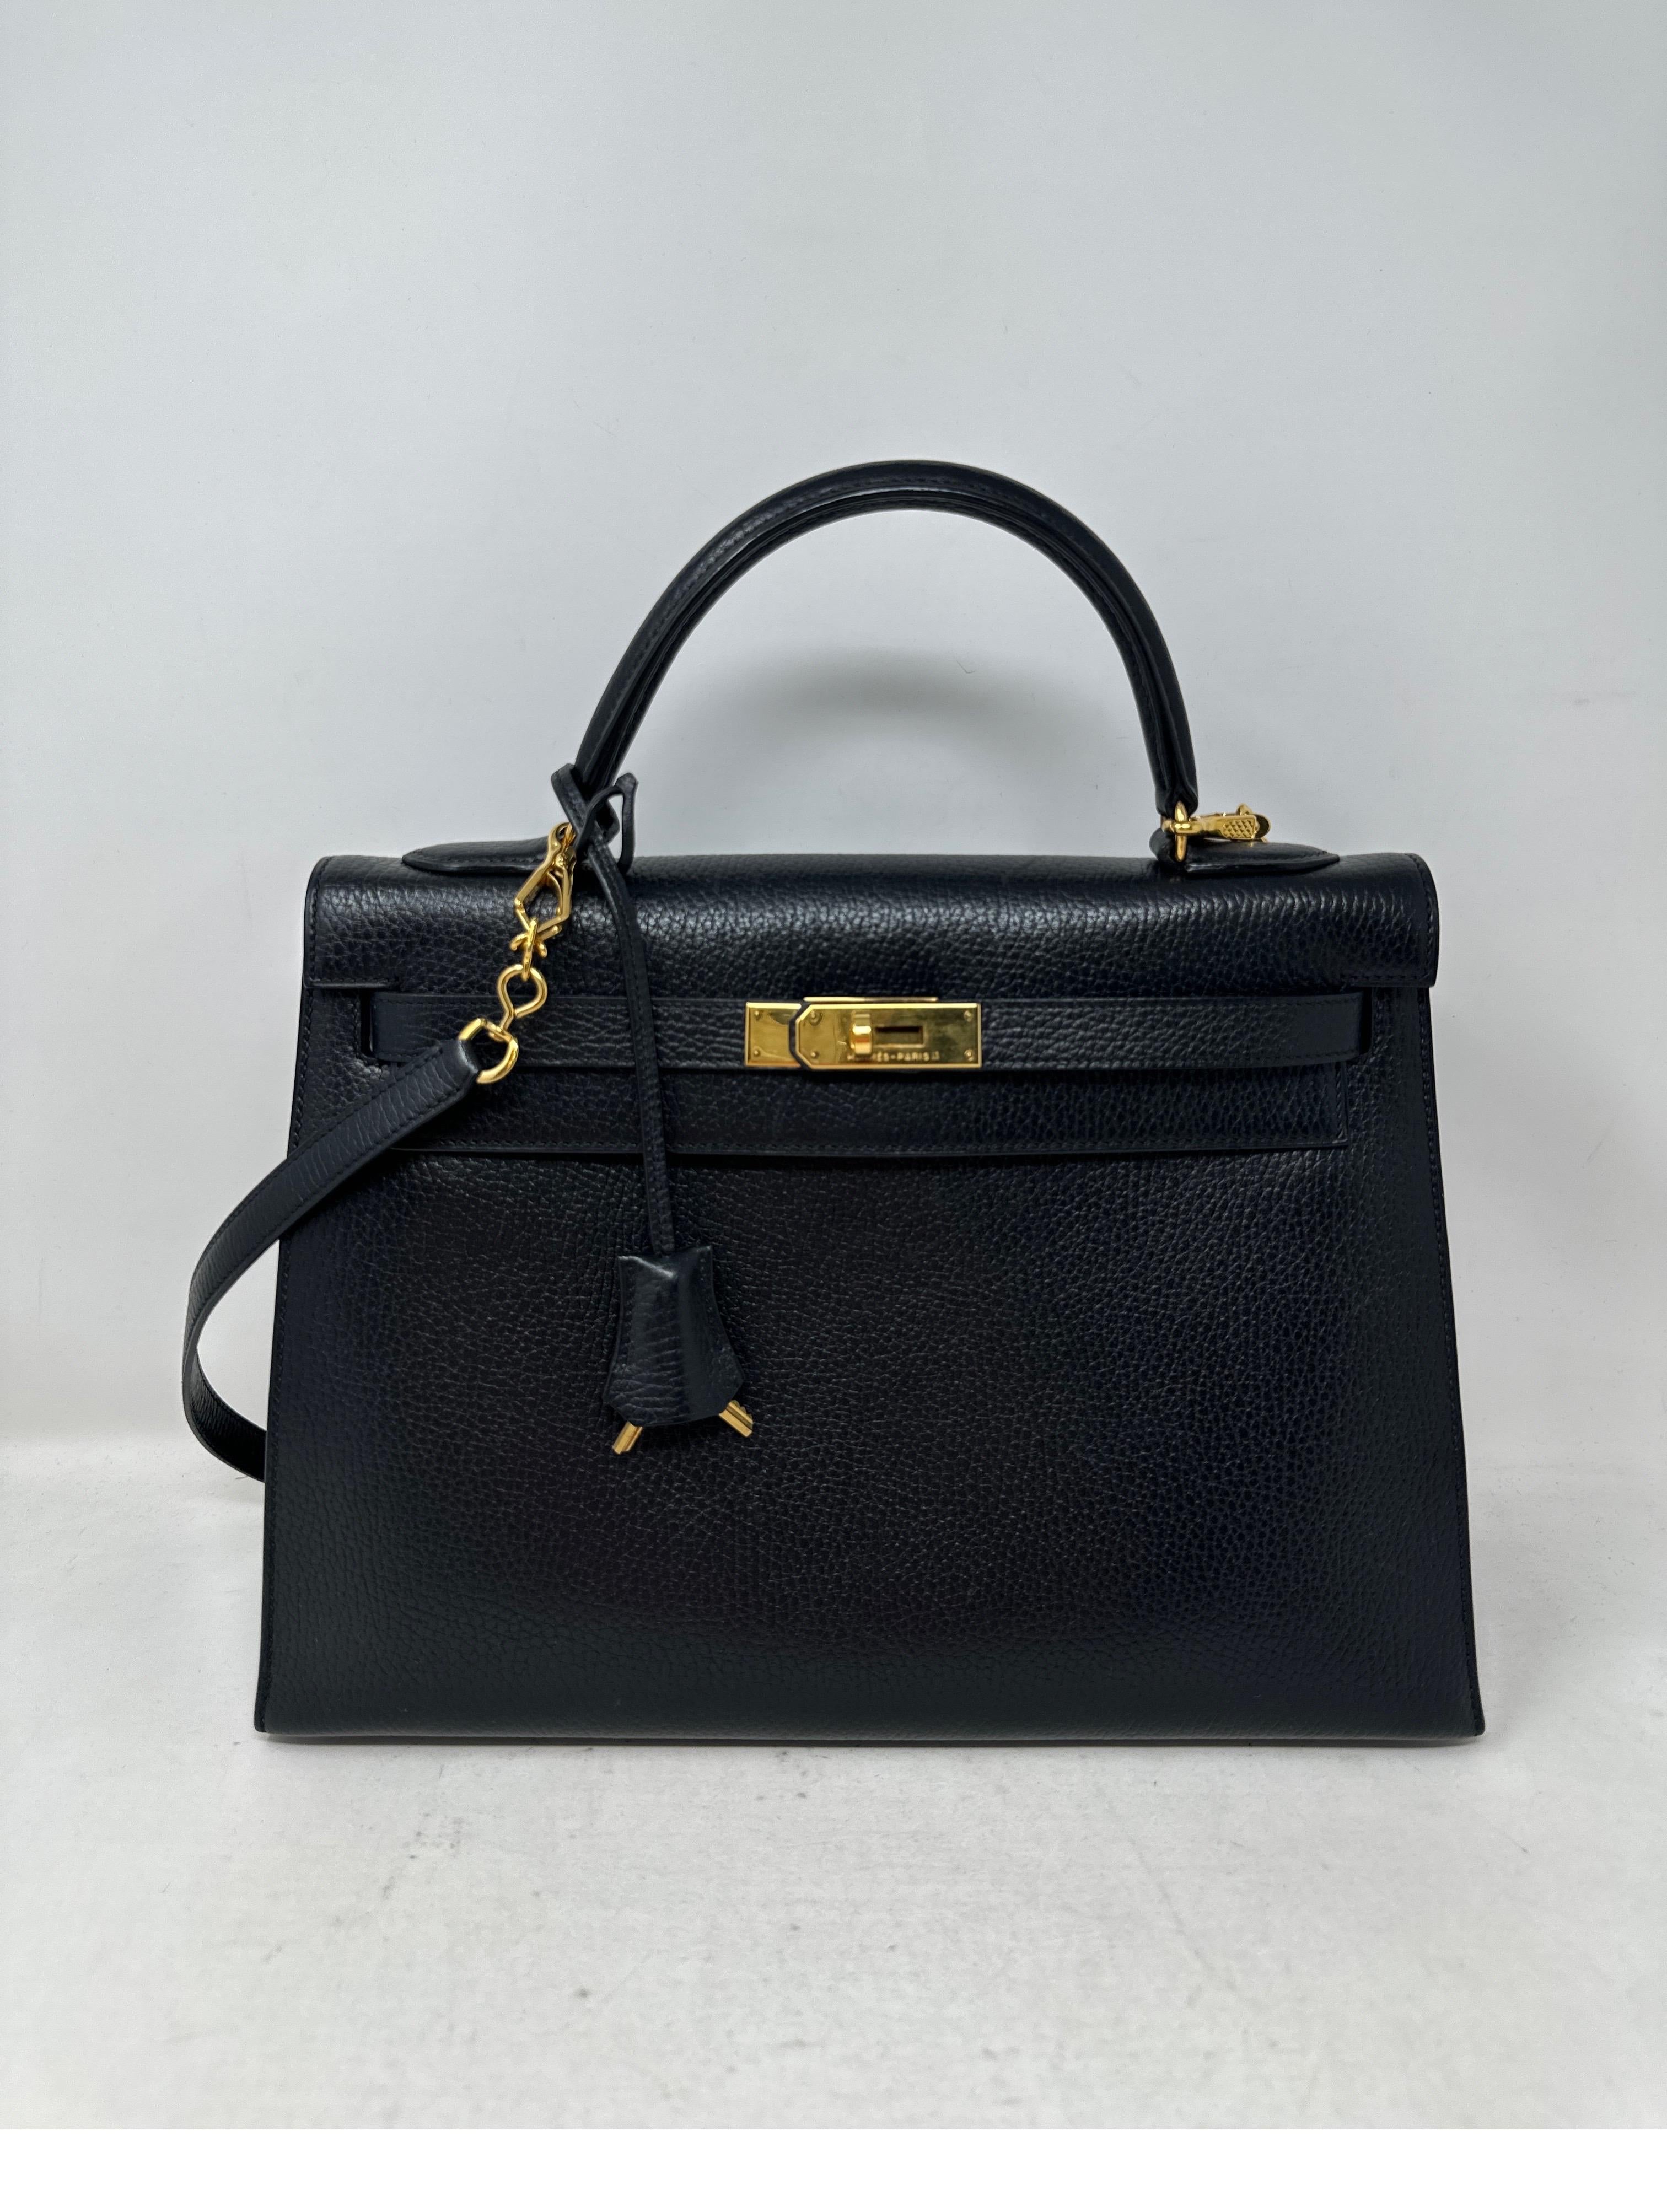 Hermes Black Kelly 28 Bag. Excellent condition. Gold hardware. Sellier bag. Interior clean. Includes clochette, lock, keys, and dust bag. Guaranteed authentic. 